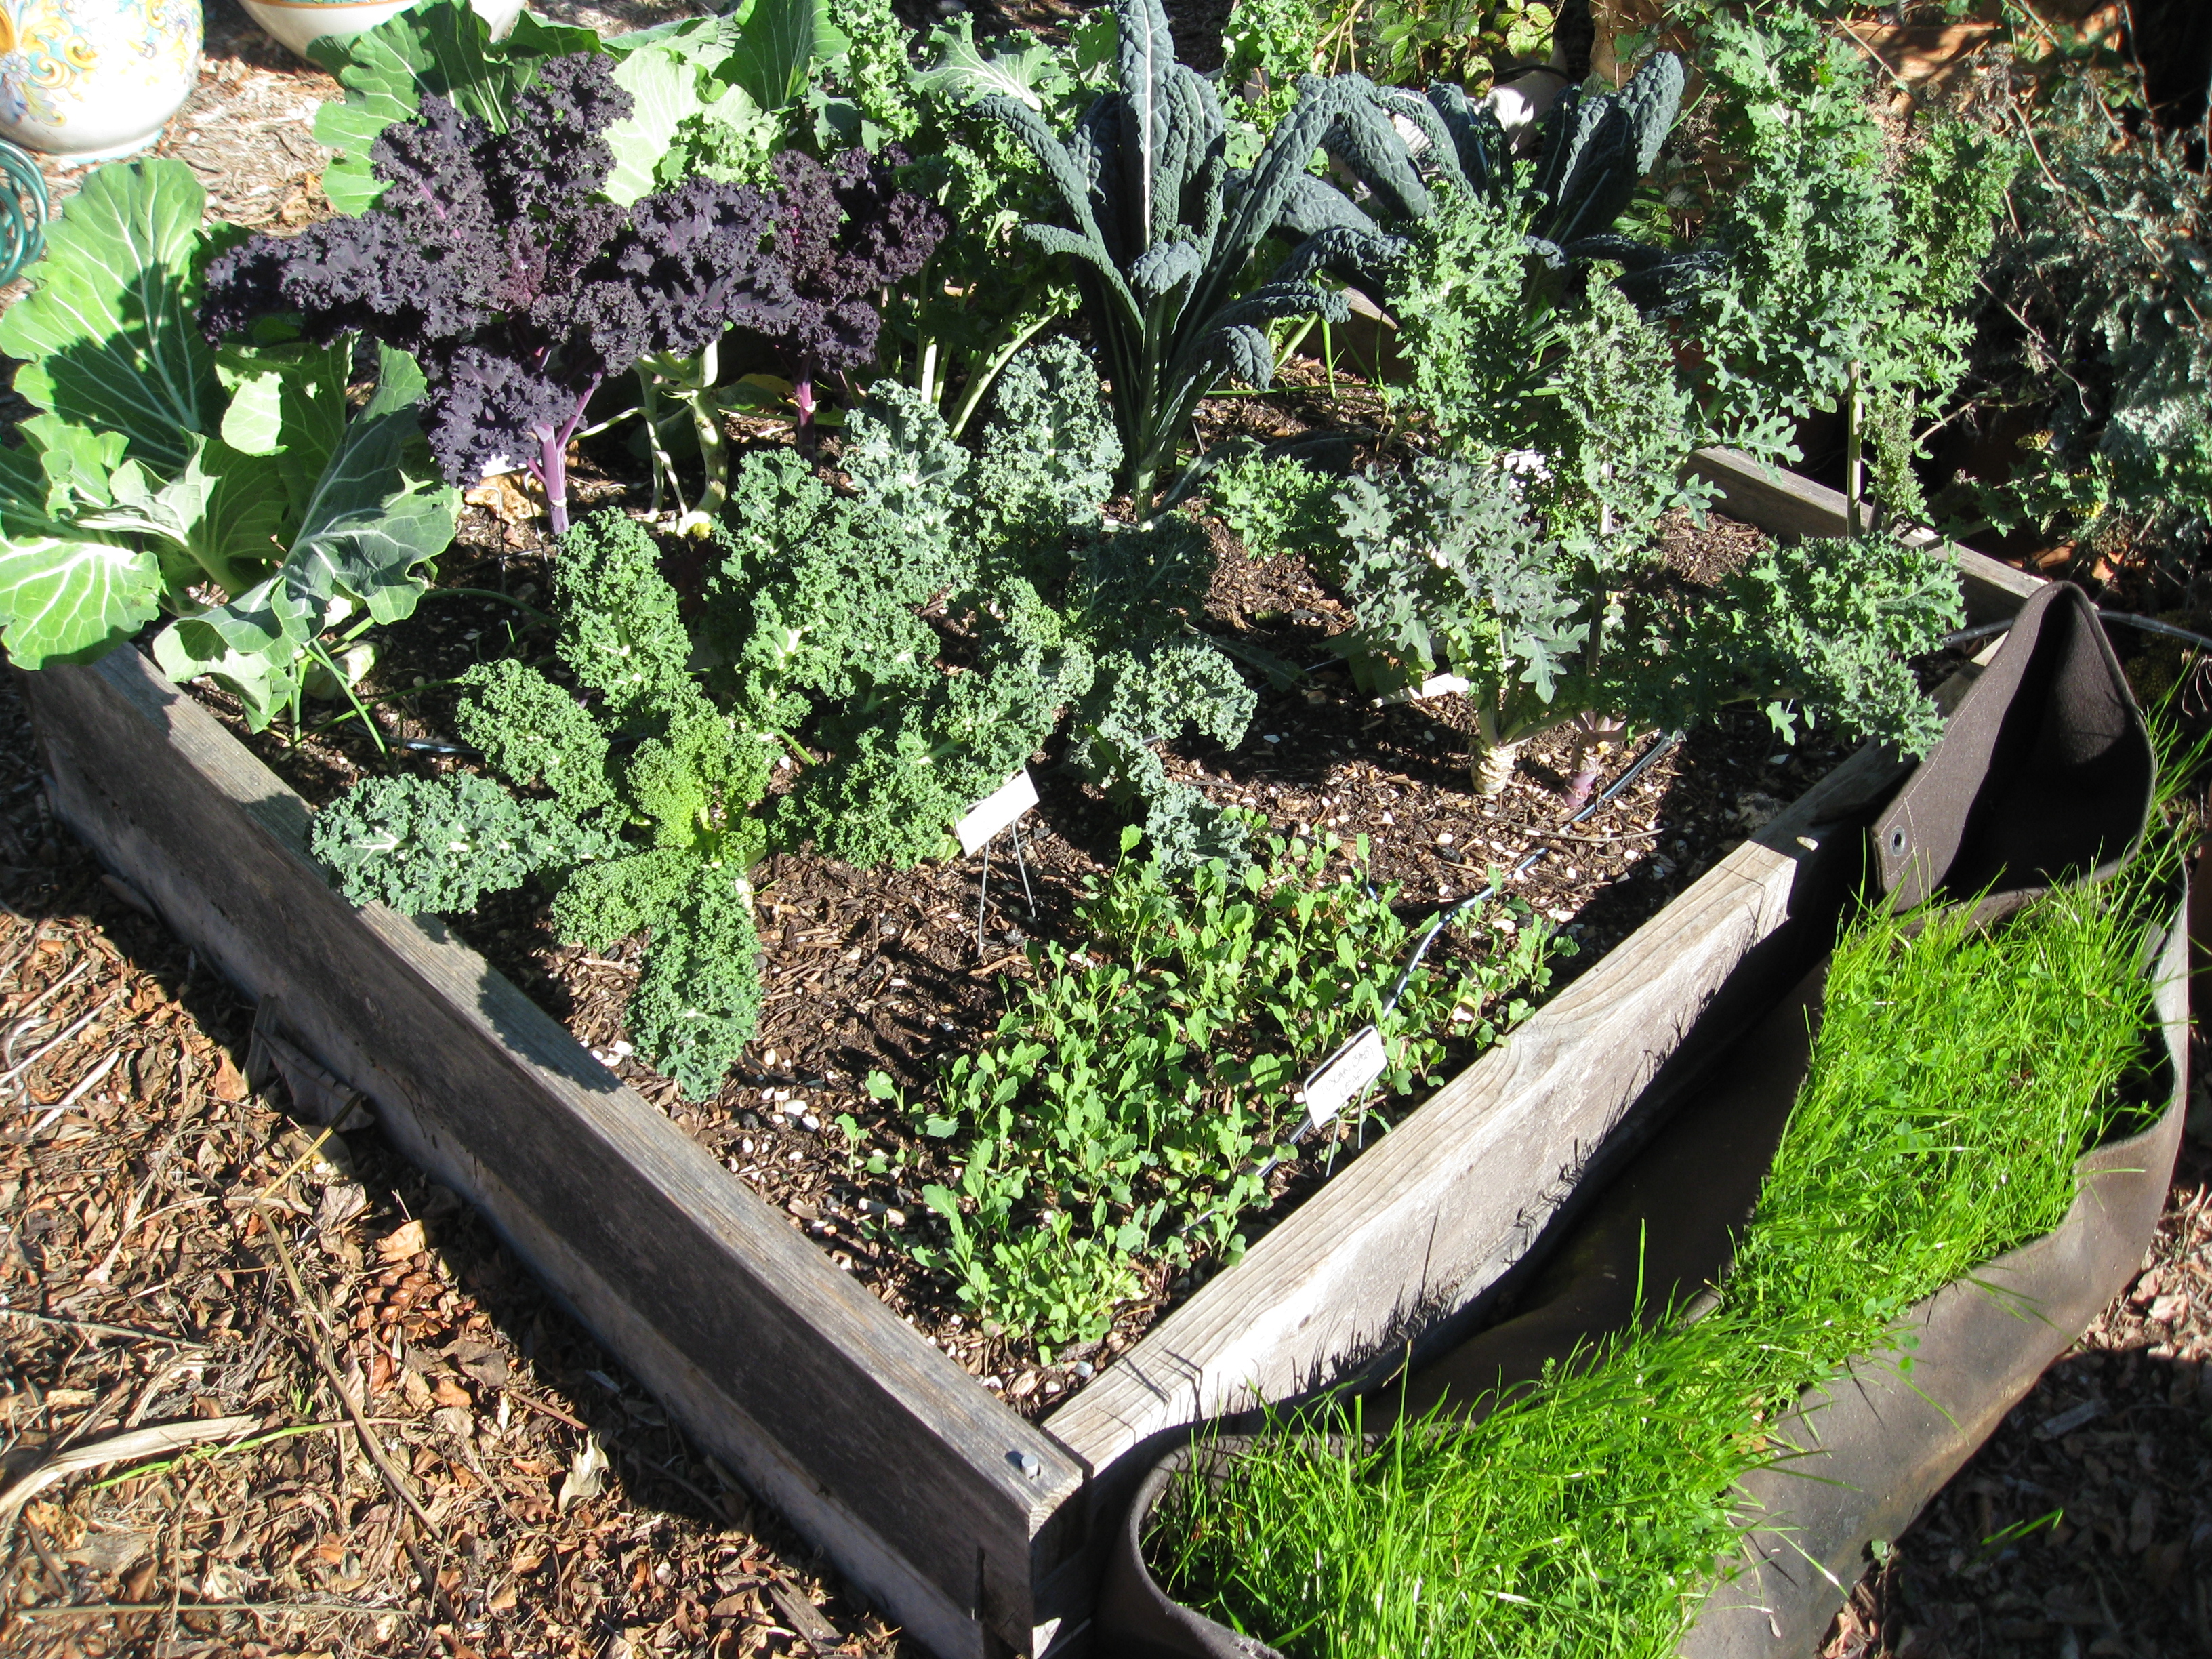 8 types of kale growing happily in the winter garden.